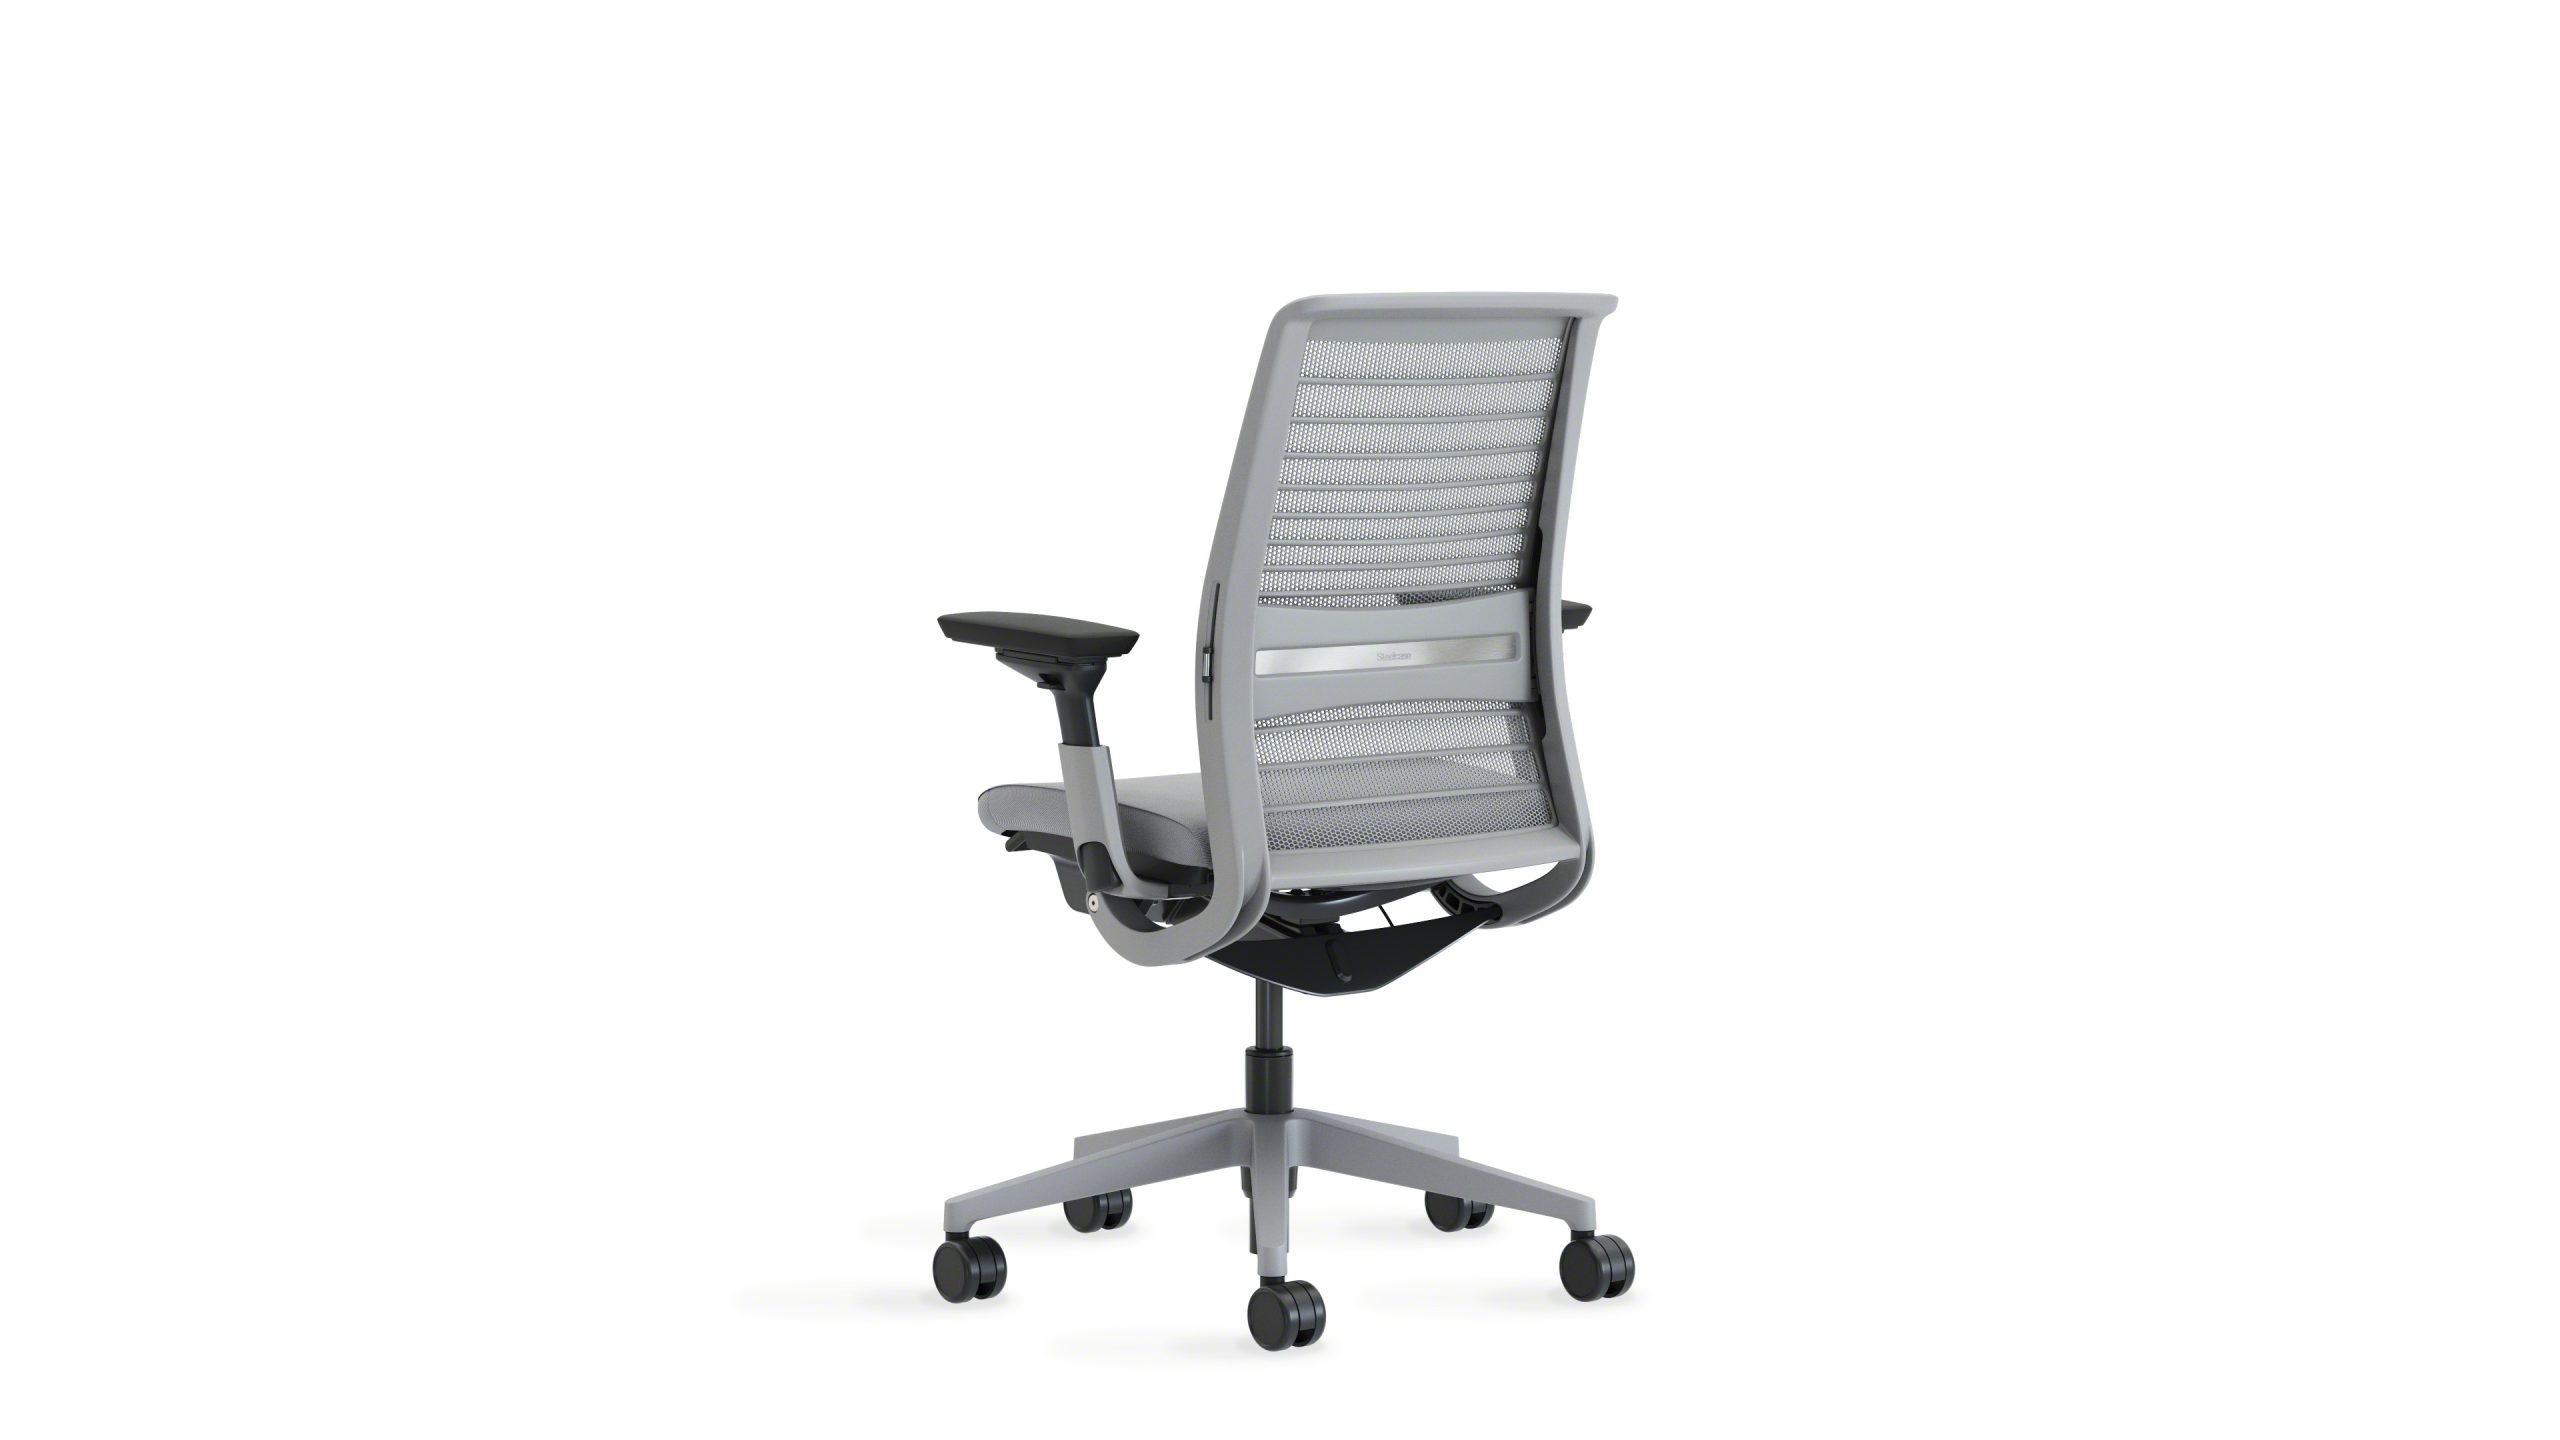 Steelcase Leap Chairs with 3D Knit Mesh Back